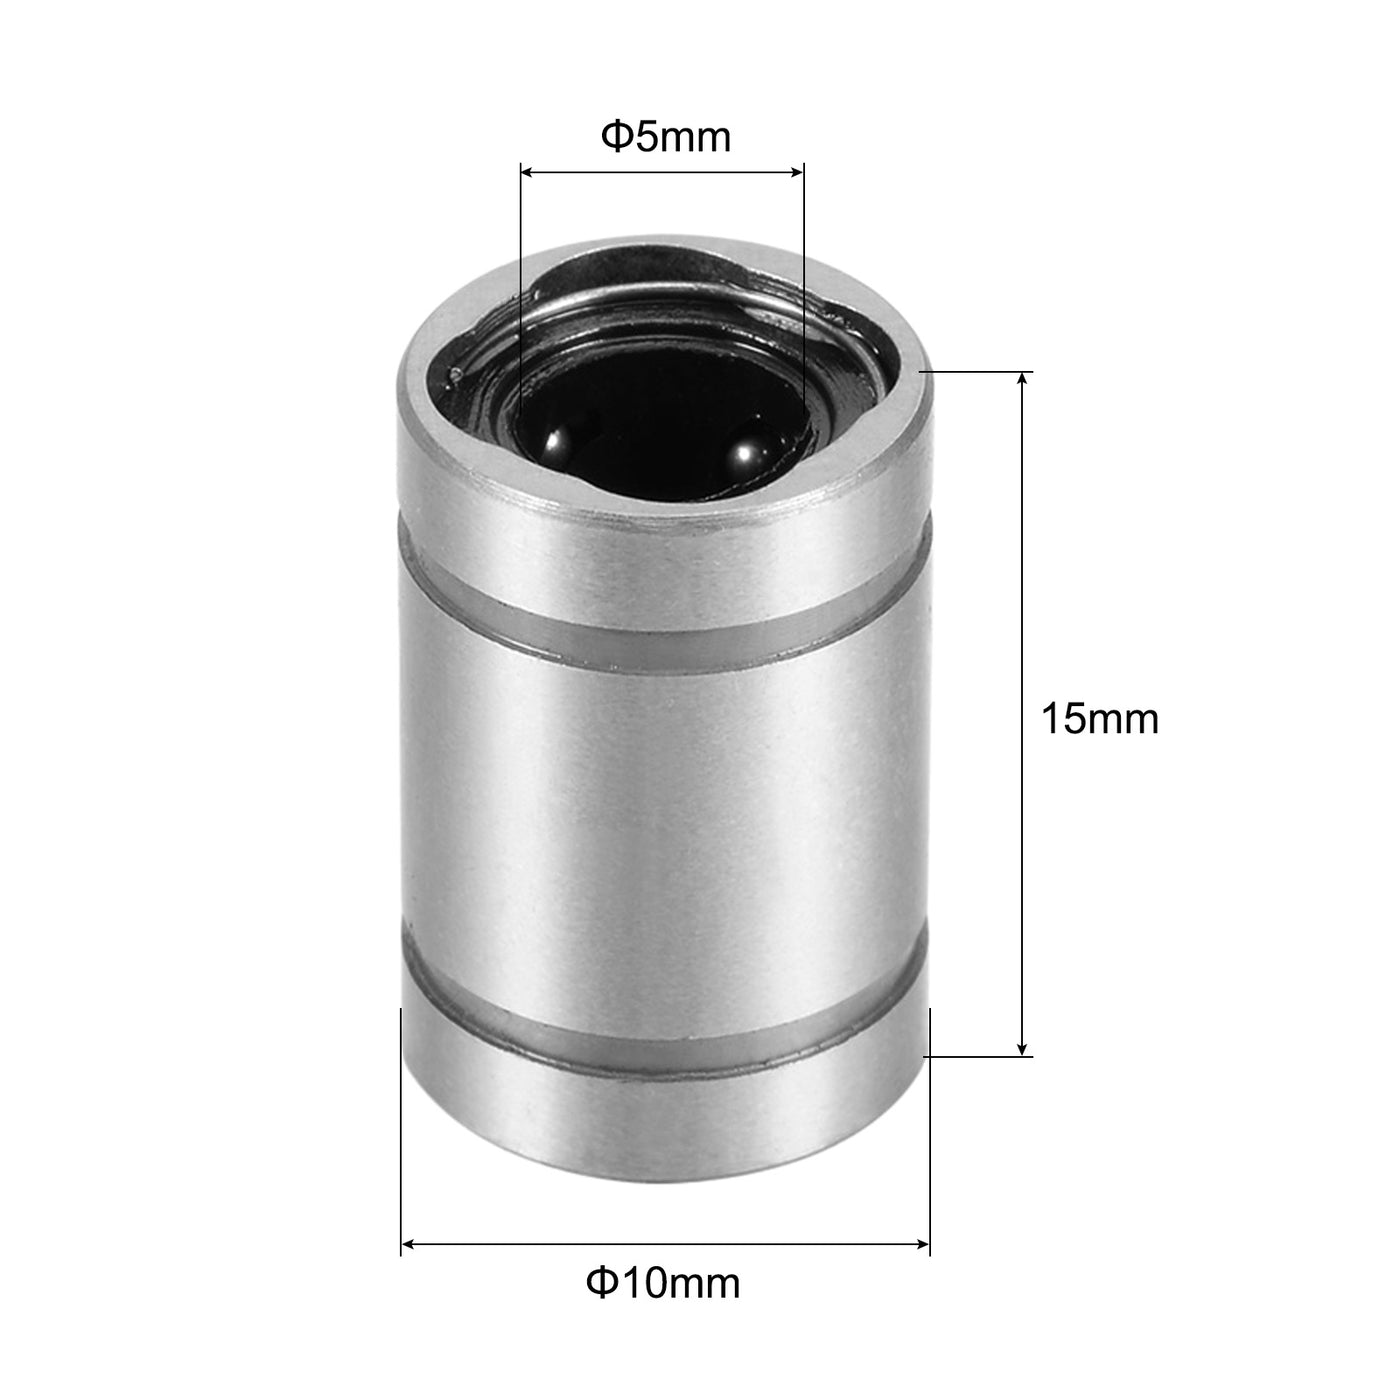 uxcell Uxcell 6pcs LM5UU Linear Ball Bearings, 5mm Bore 10mm OD 15mm Long Linear Bearing for CNC, 3D Printer